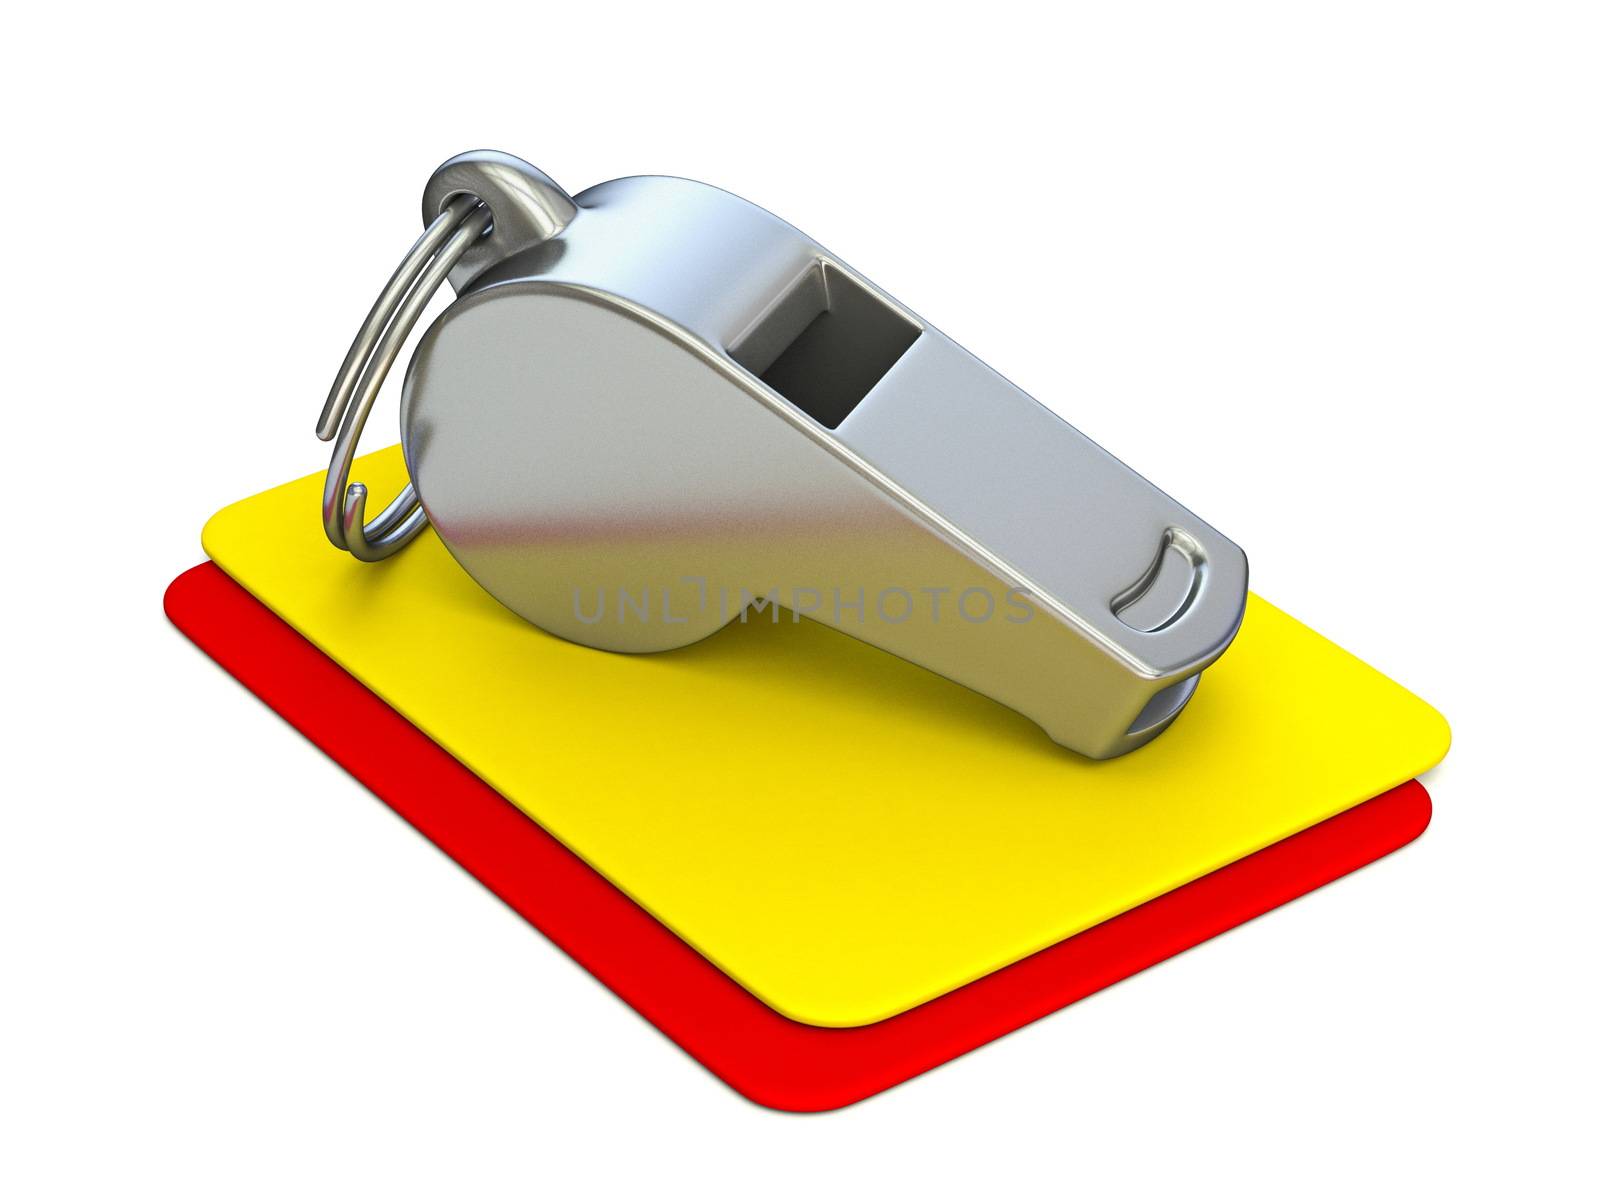 Metal whistle, yellow and red card 3D render illustration isolated on white background